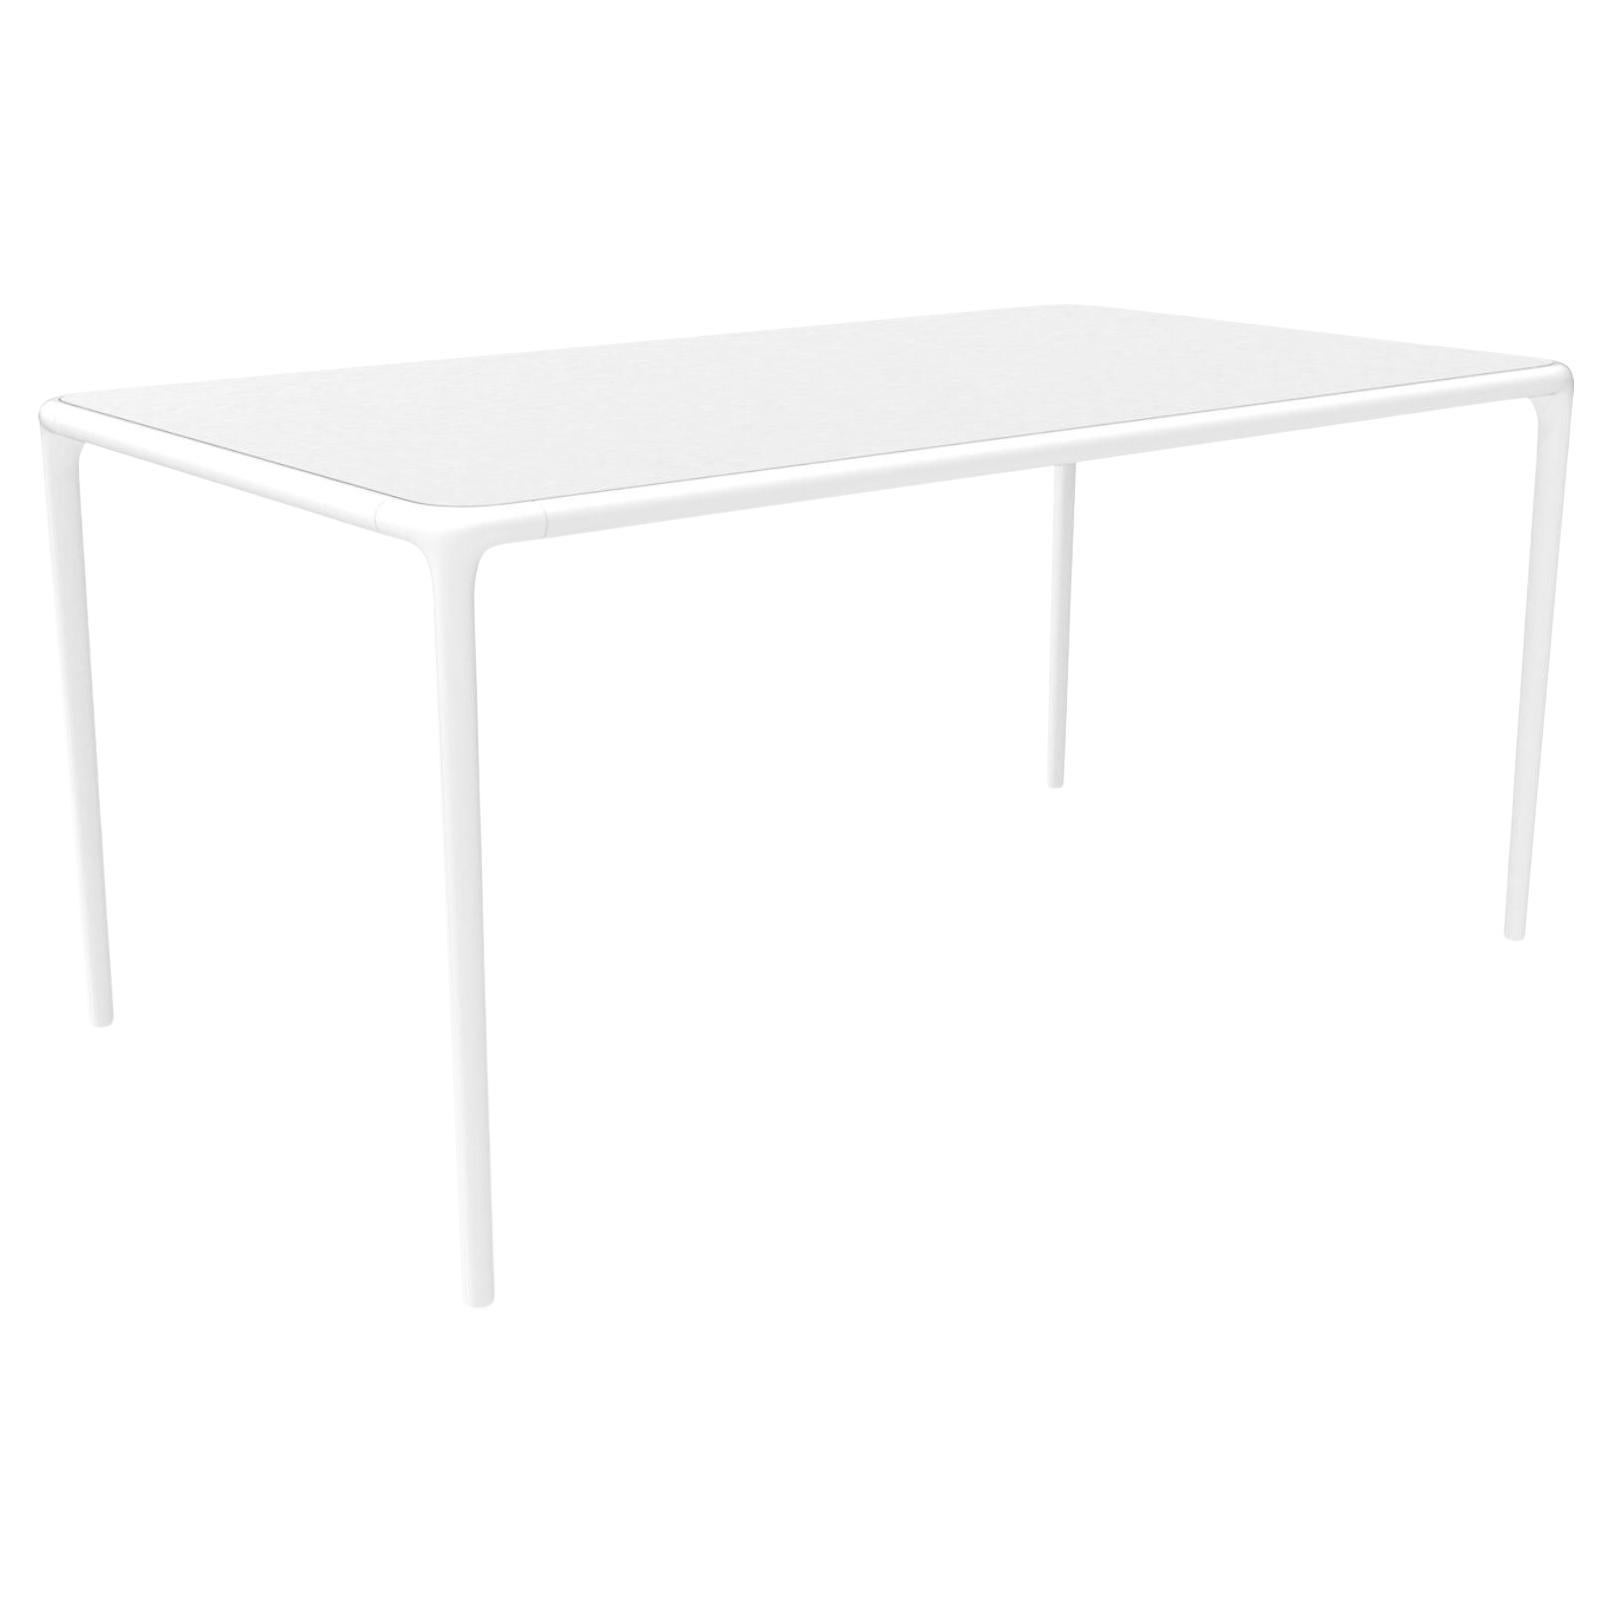 Xaloc White Glass Top Table 160 by Mowee For Sale